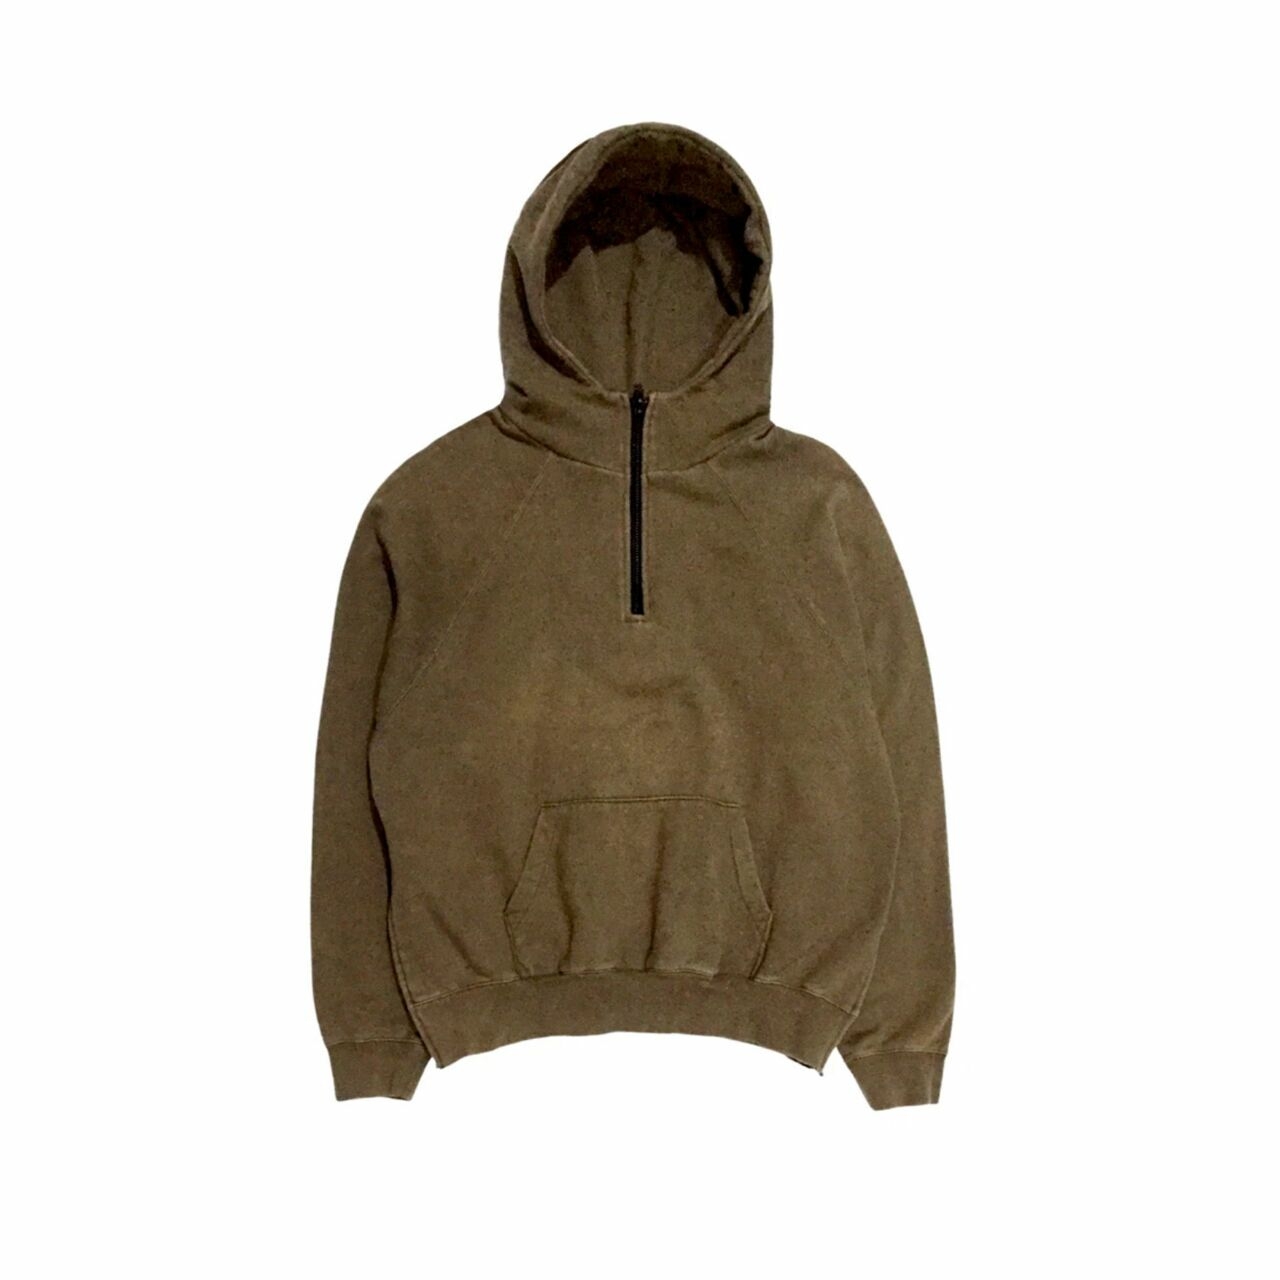 Fear Of God x Pacsun Olive Green Half Zip Hoodie Sweater